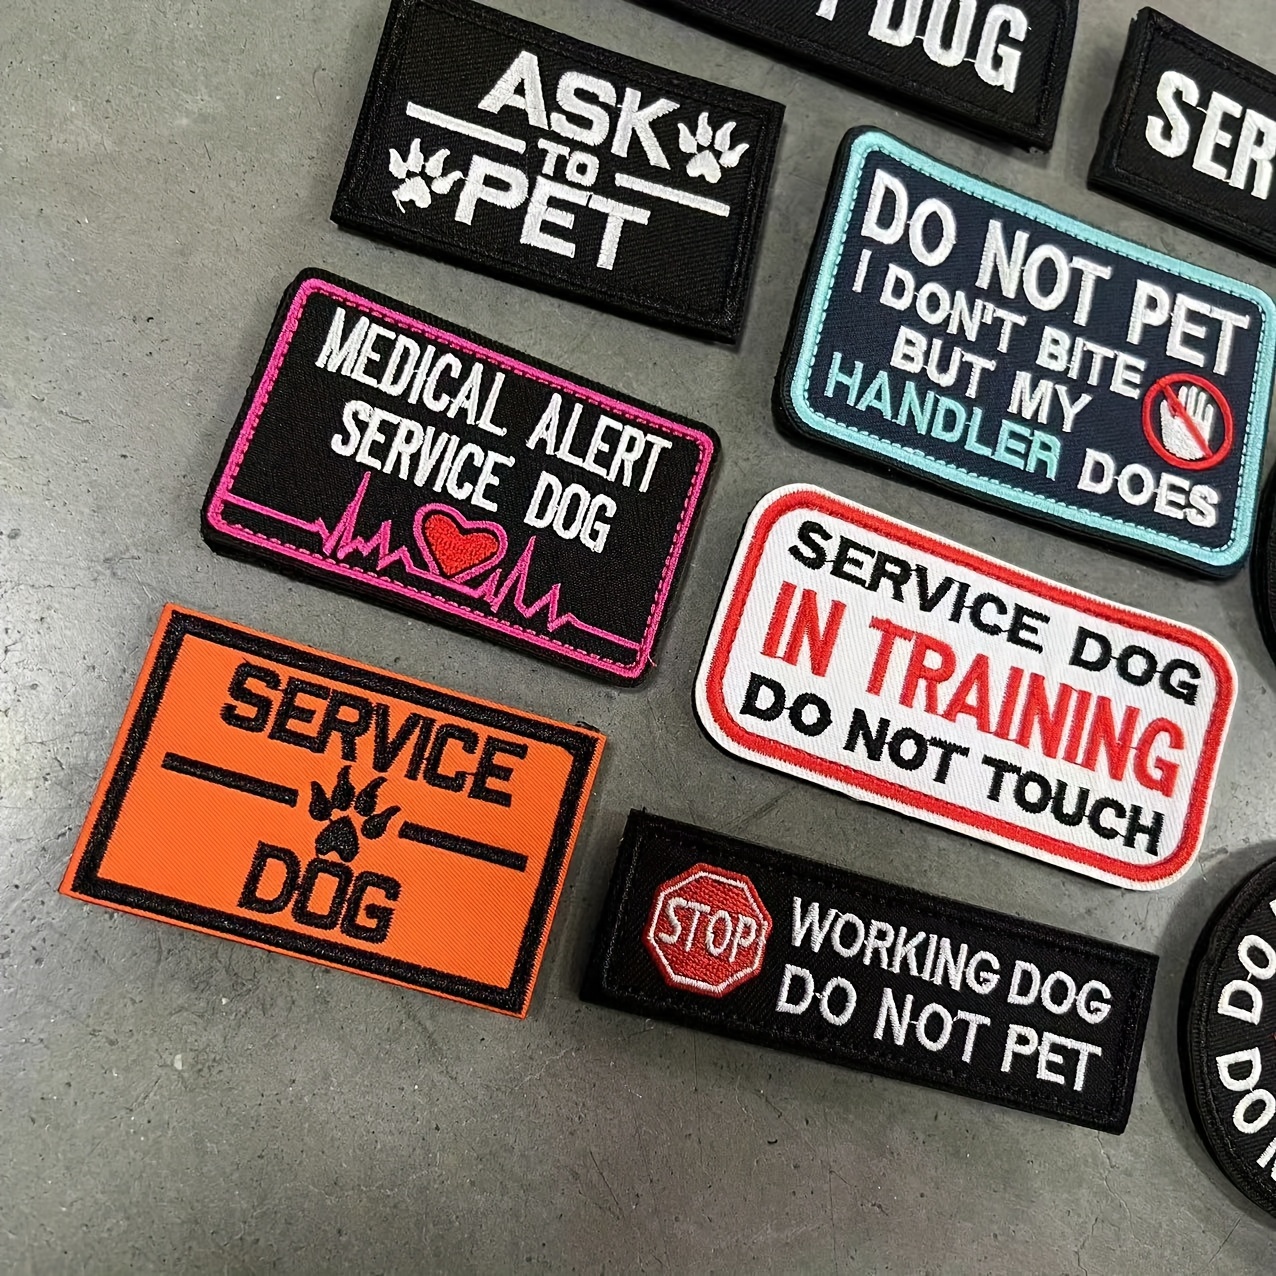 

10pcs/pack Assorted Service Dog Patches, Embroidered "do Not Pet" & "in Training" Signs For Dog Vests/harnesses, Durable & Visible Accessory For Working Dogs